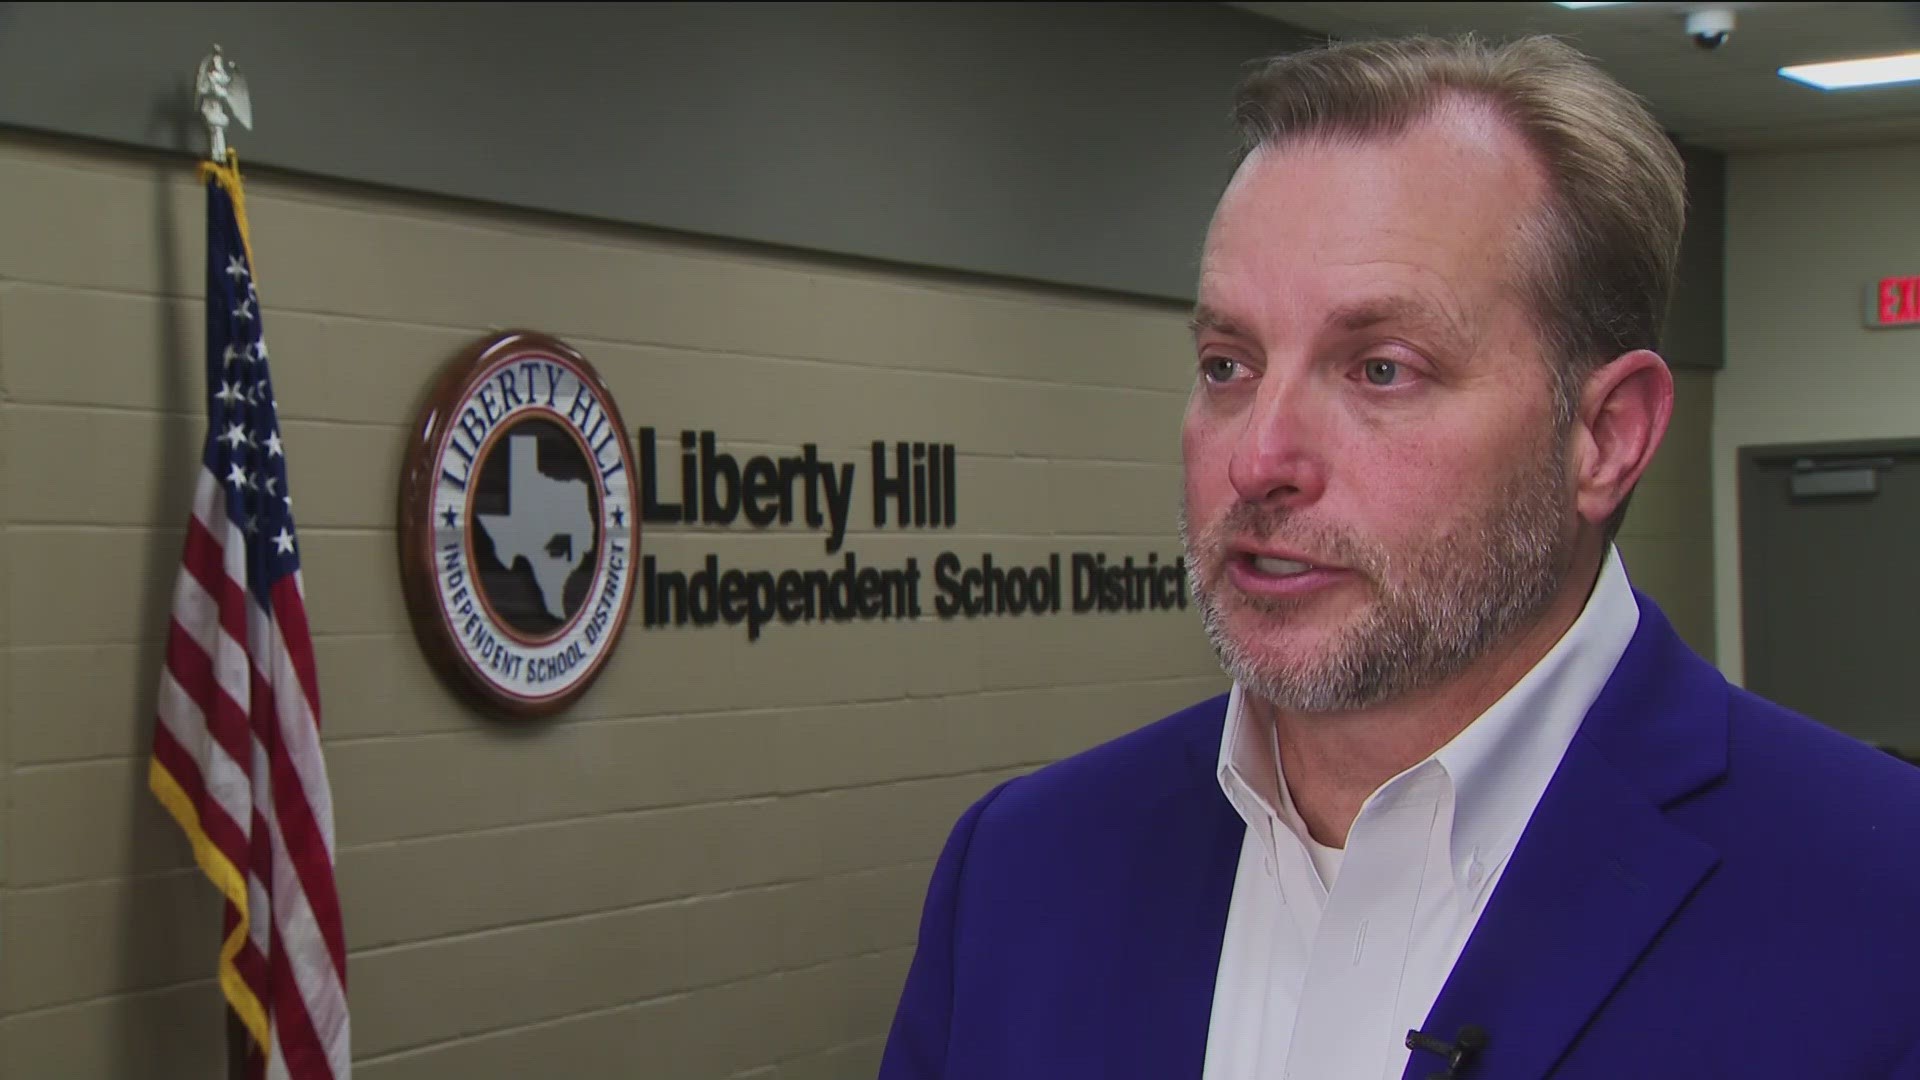 One of the fastest growing school districts in the state is trying to accommodate a lot more students. Liberty Hill ISD is hosting a $471 million bond election.